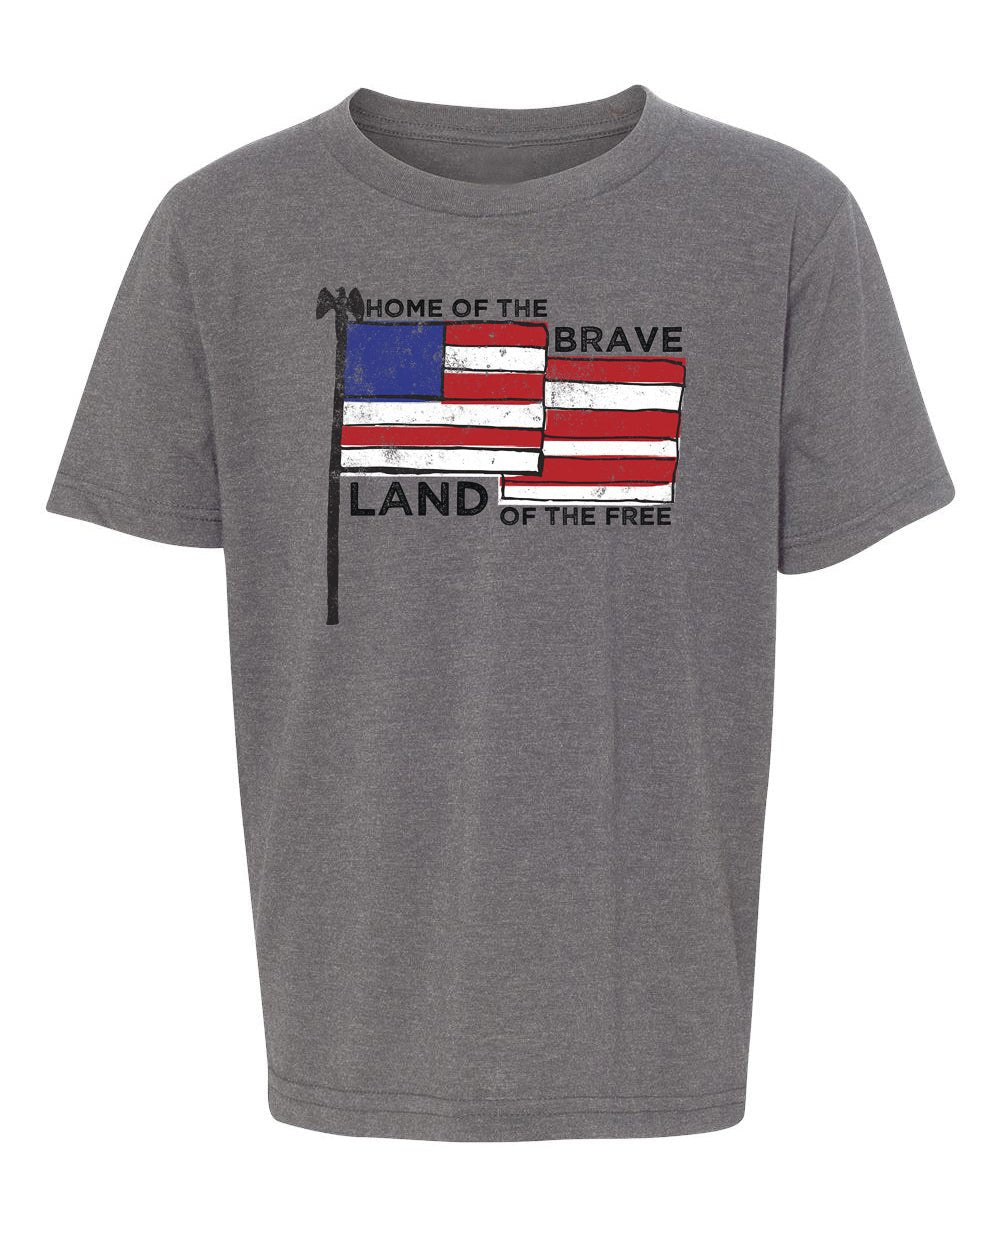 Land of the Free, Home of the Brave Kids 4th of July T Shirts - Mato & Hash